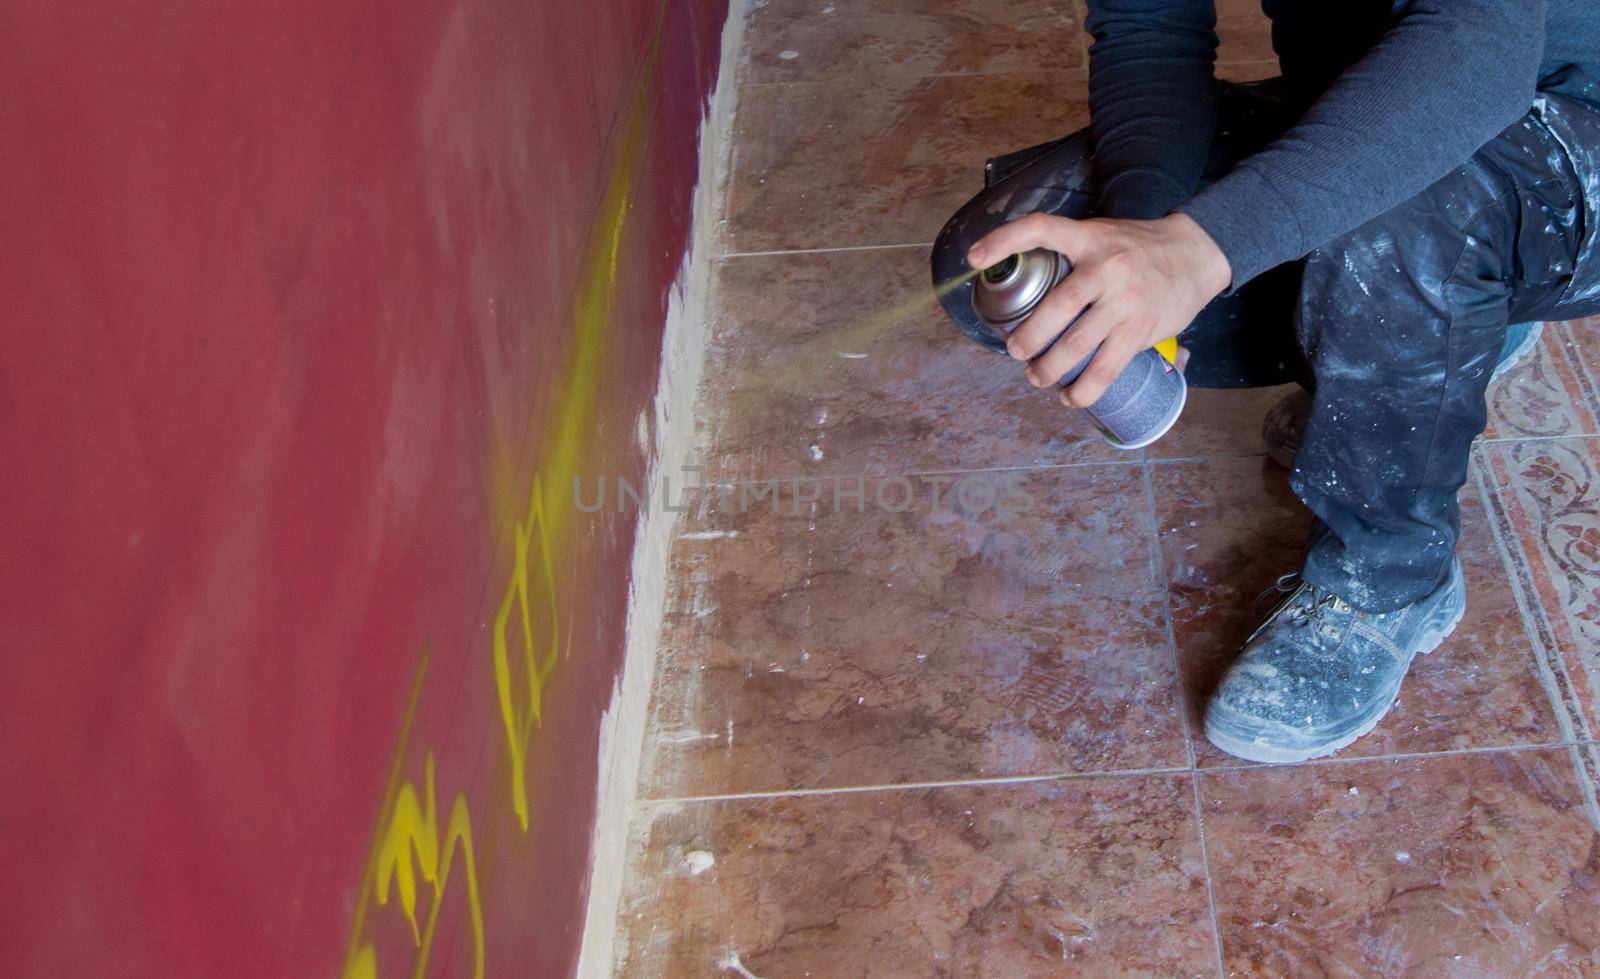 Bricklayer marking with a yellow spray on the purple wall of a house under renovation.